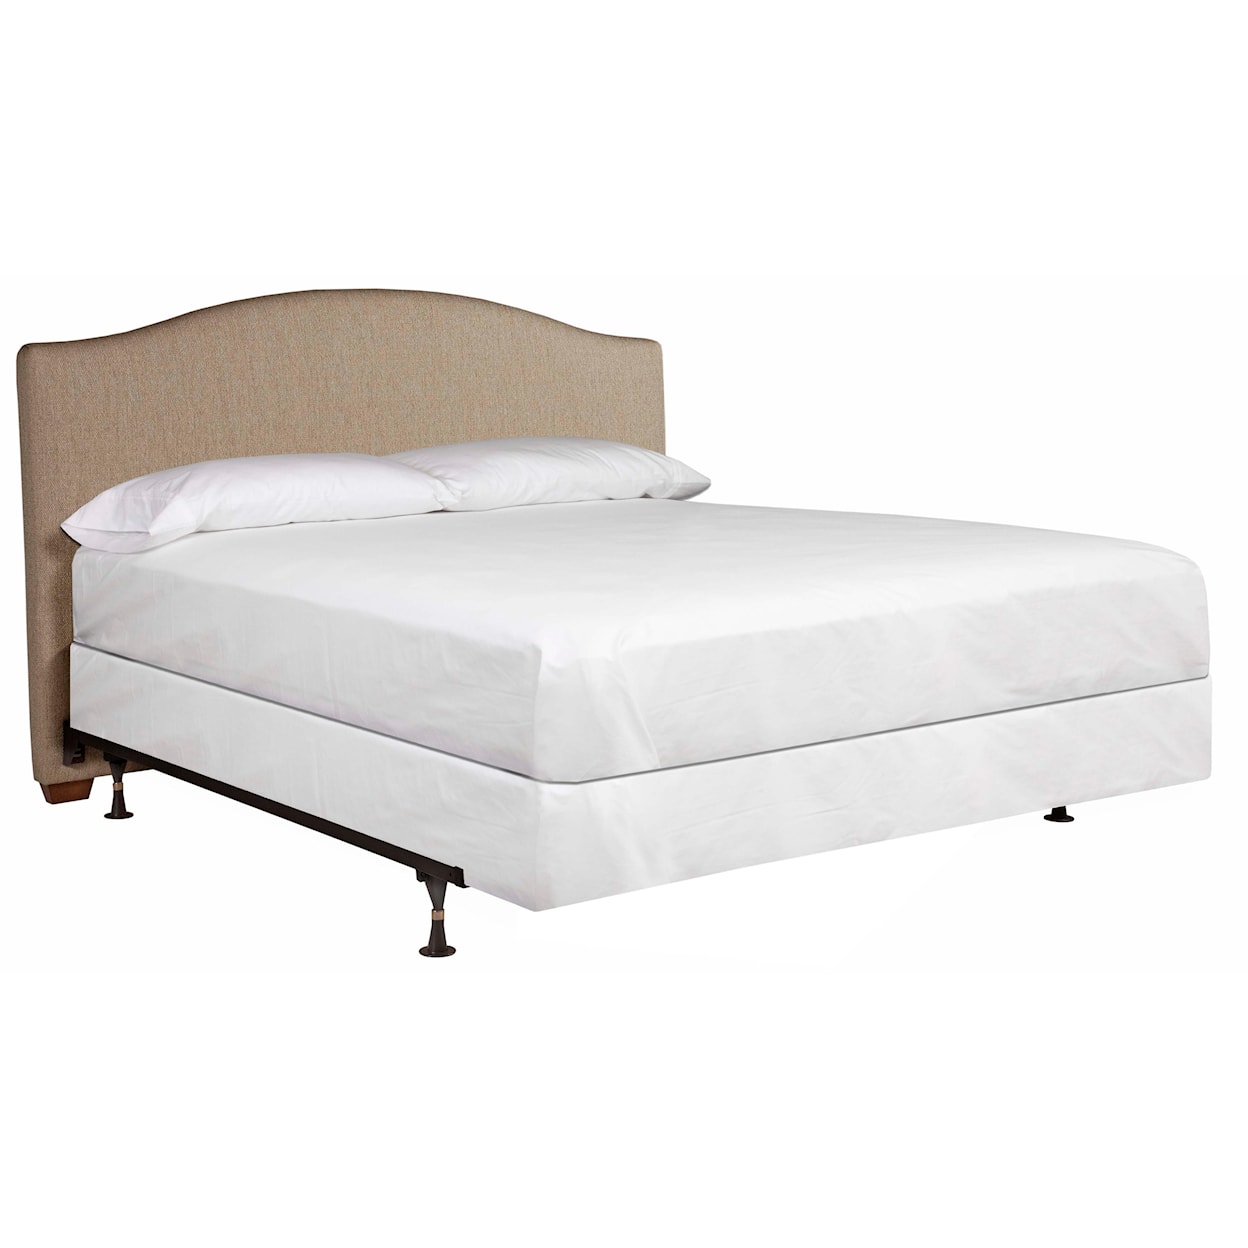 Kincaid Furniture Upholstered Beds Dover Cal. King Headboard